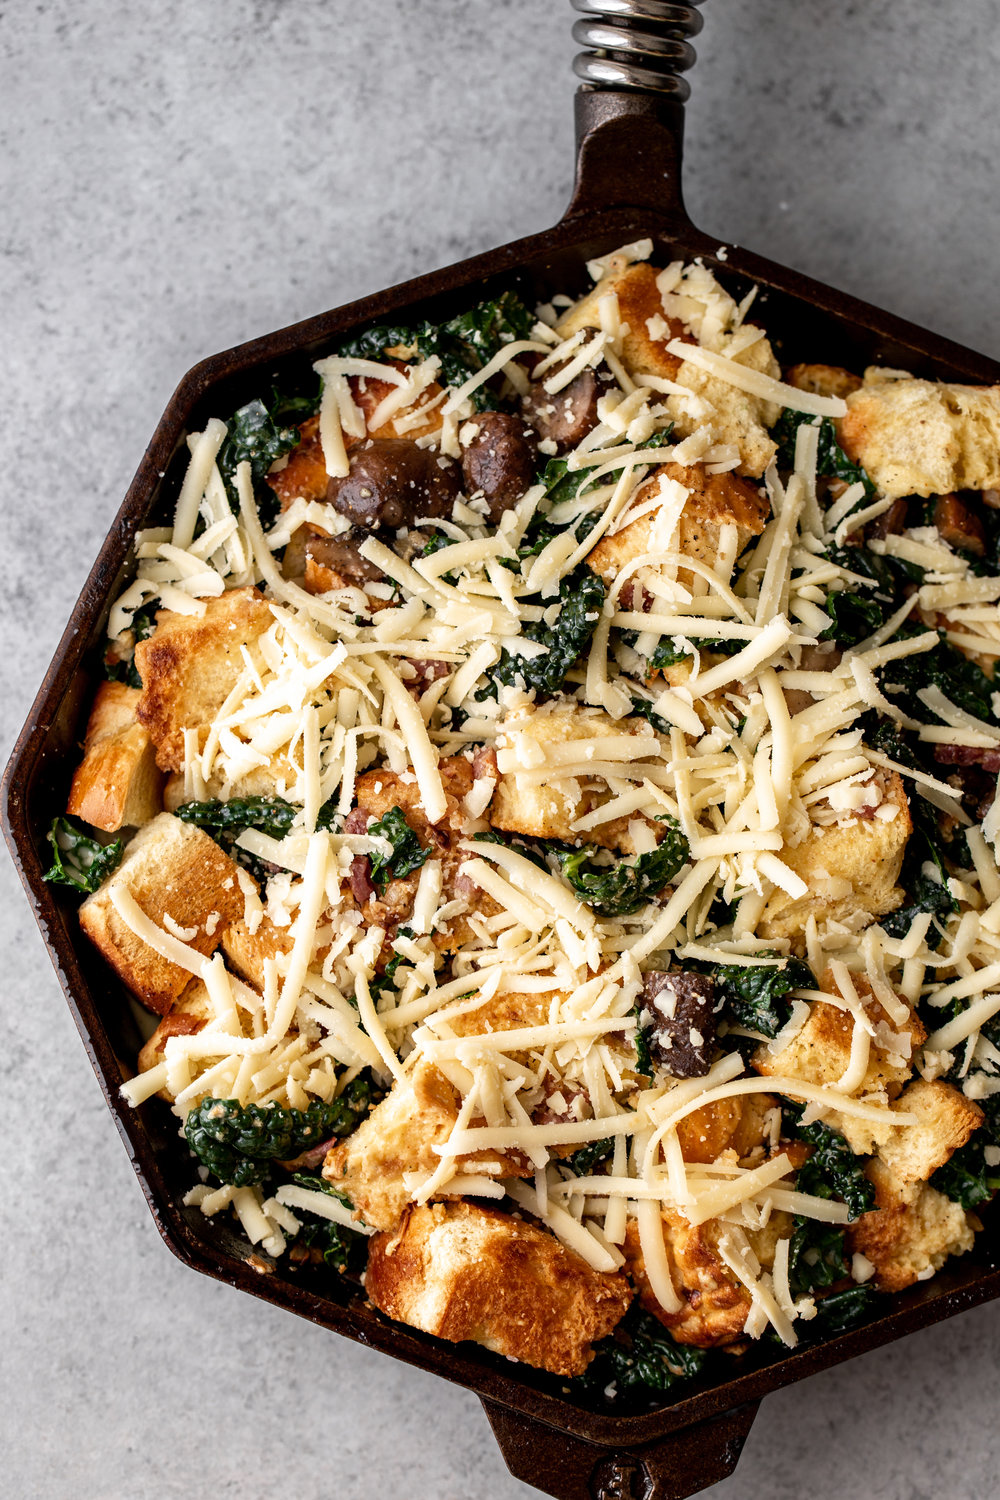 Cheesy Mushroom and Kale Brioche Strata with Pancetta assembled in cast iron pan